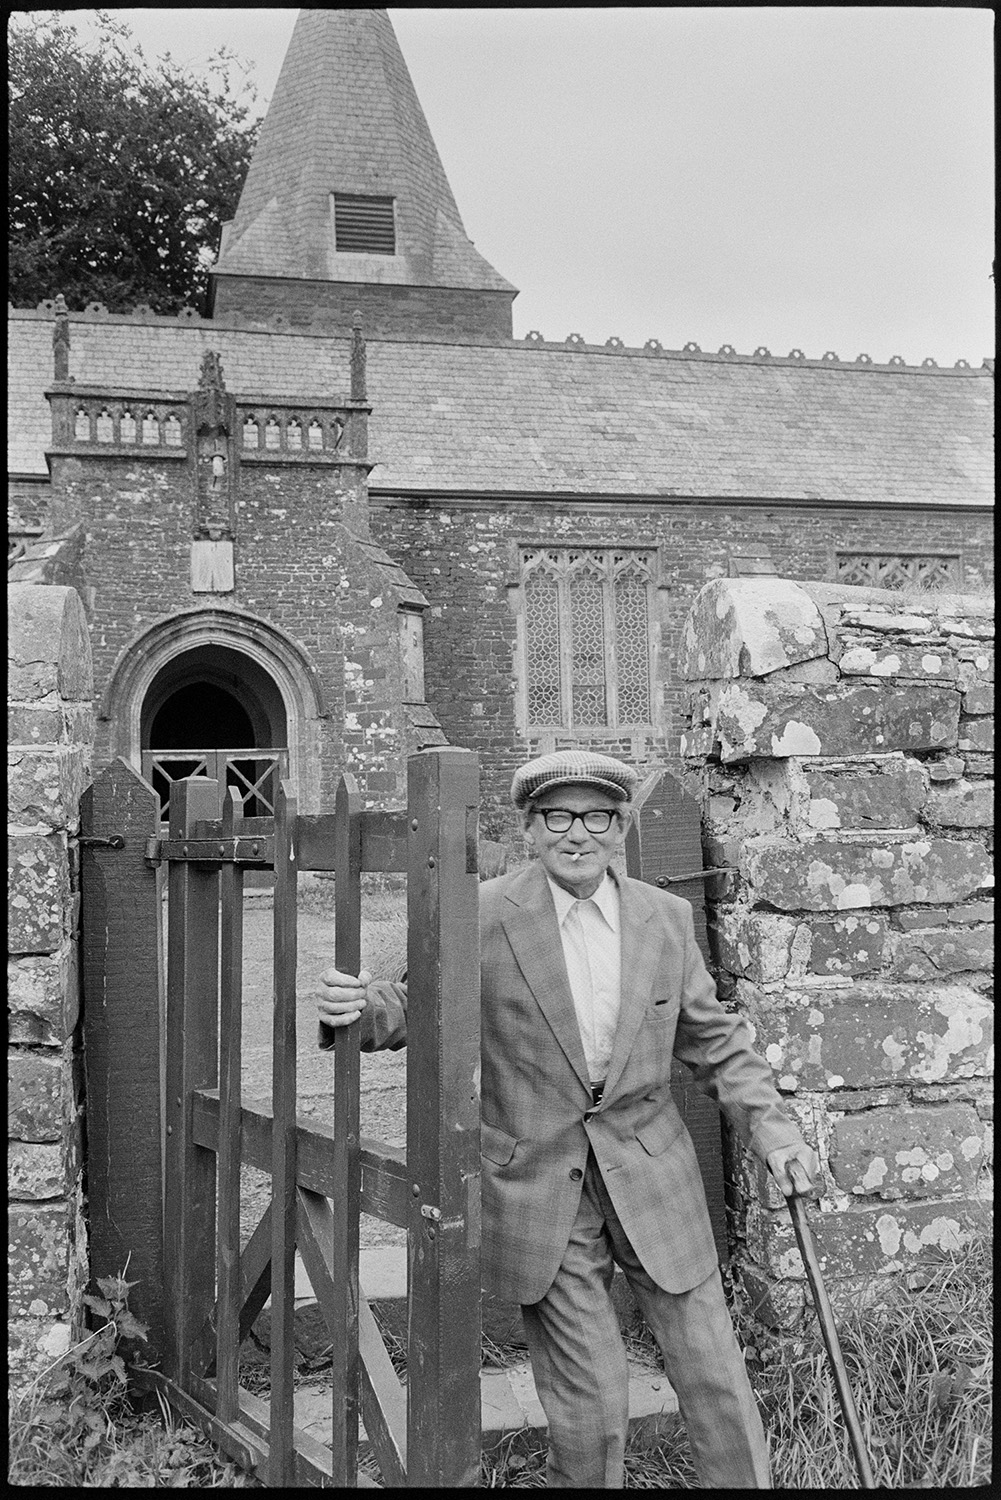 Village revel, fete, women at cake stall, guessing weight of ram, side shows.
[A man walking through the gate from Beaford churchyard, wearing a suit and smoking a cigarette. He is using a walking stick. Beaford Church can be seen in the background.]